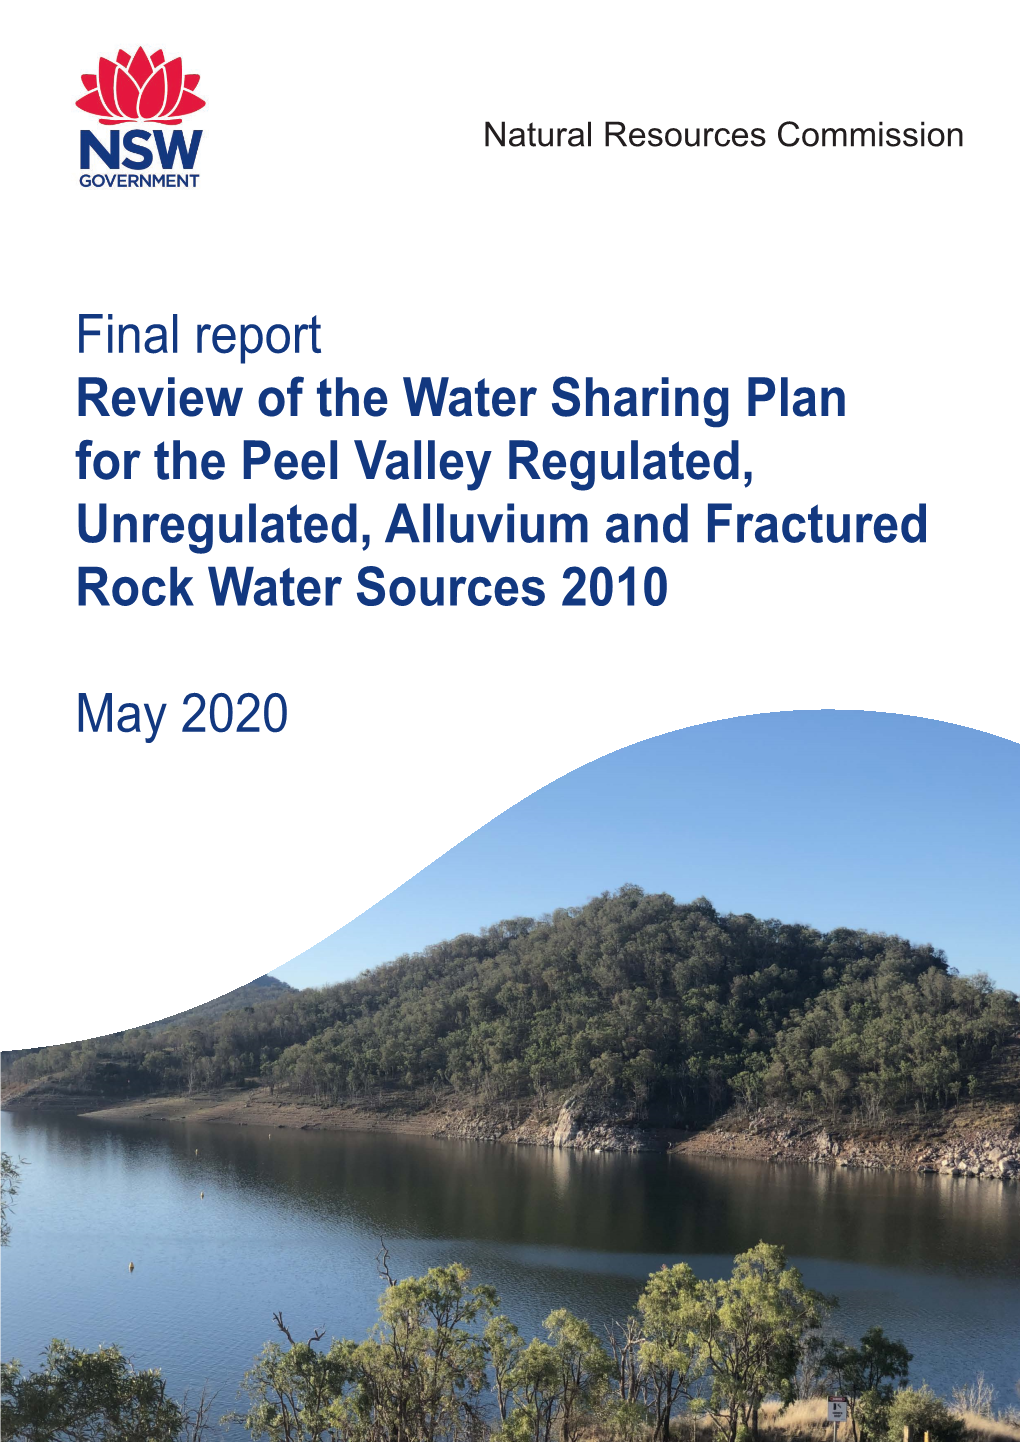 Final Report Review of the Water Sharing Plan for the Peel Valley Regulated, Unregulated, Alluvium and Fractured Rock Water Sources 2010